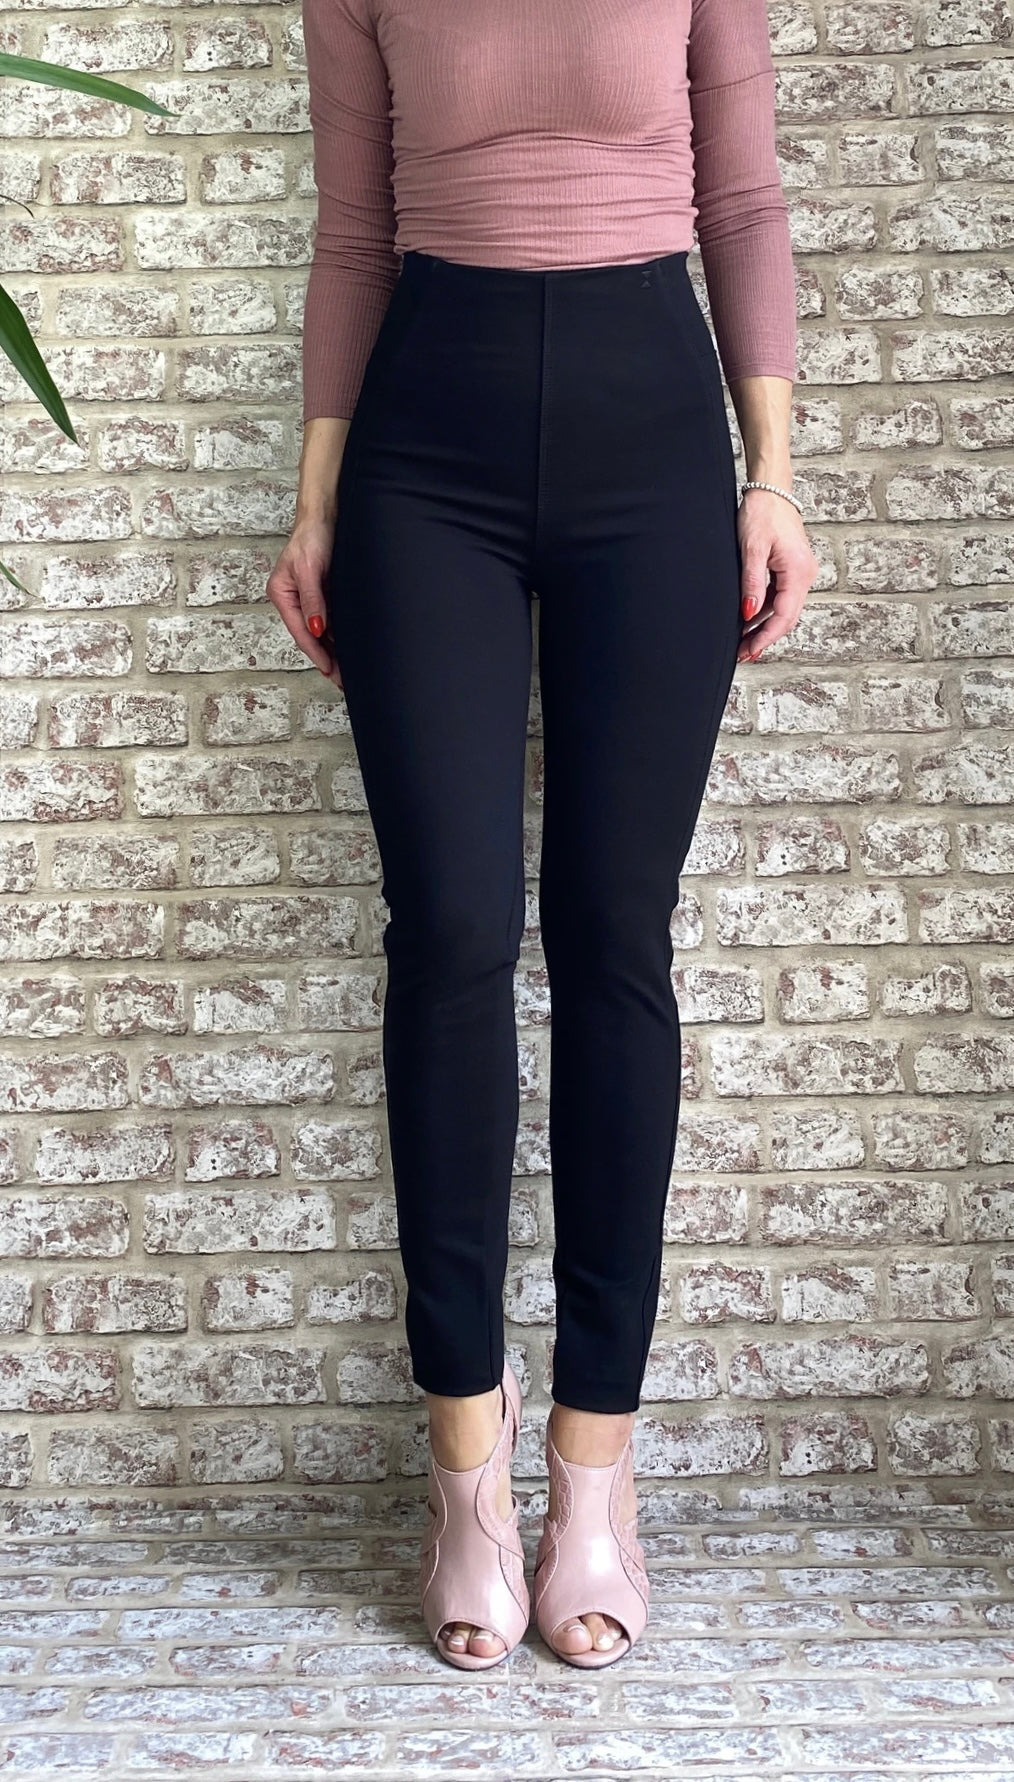 125180 Salsa Sale High-waisted black jeggings — Therapy Boutique